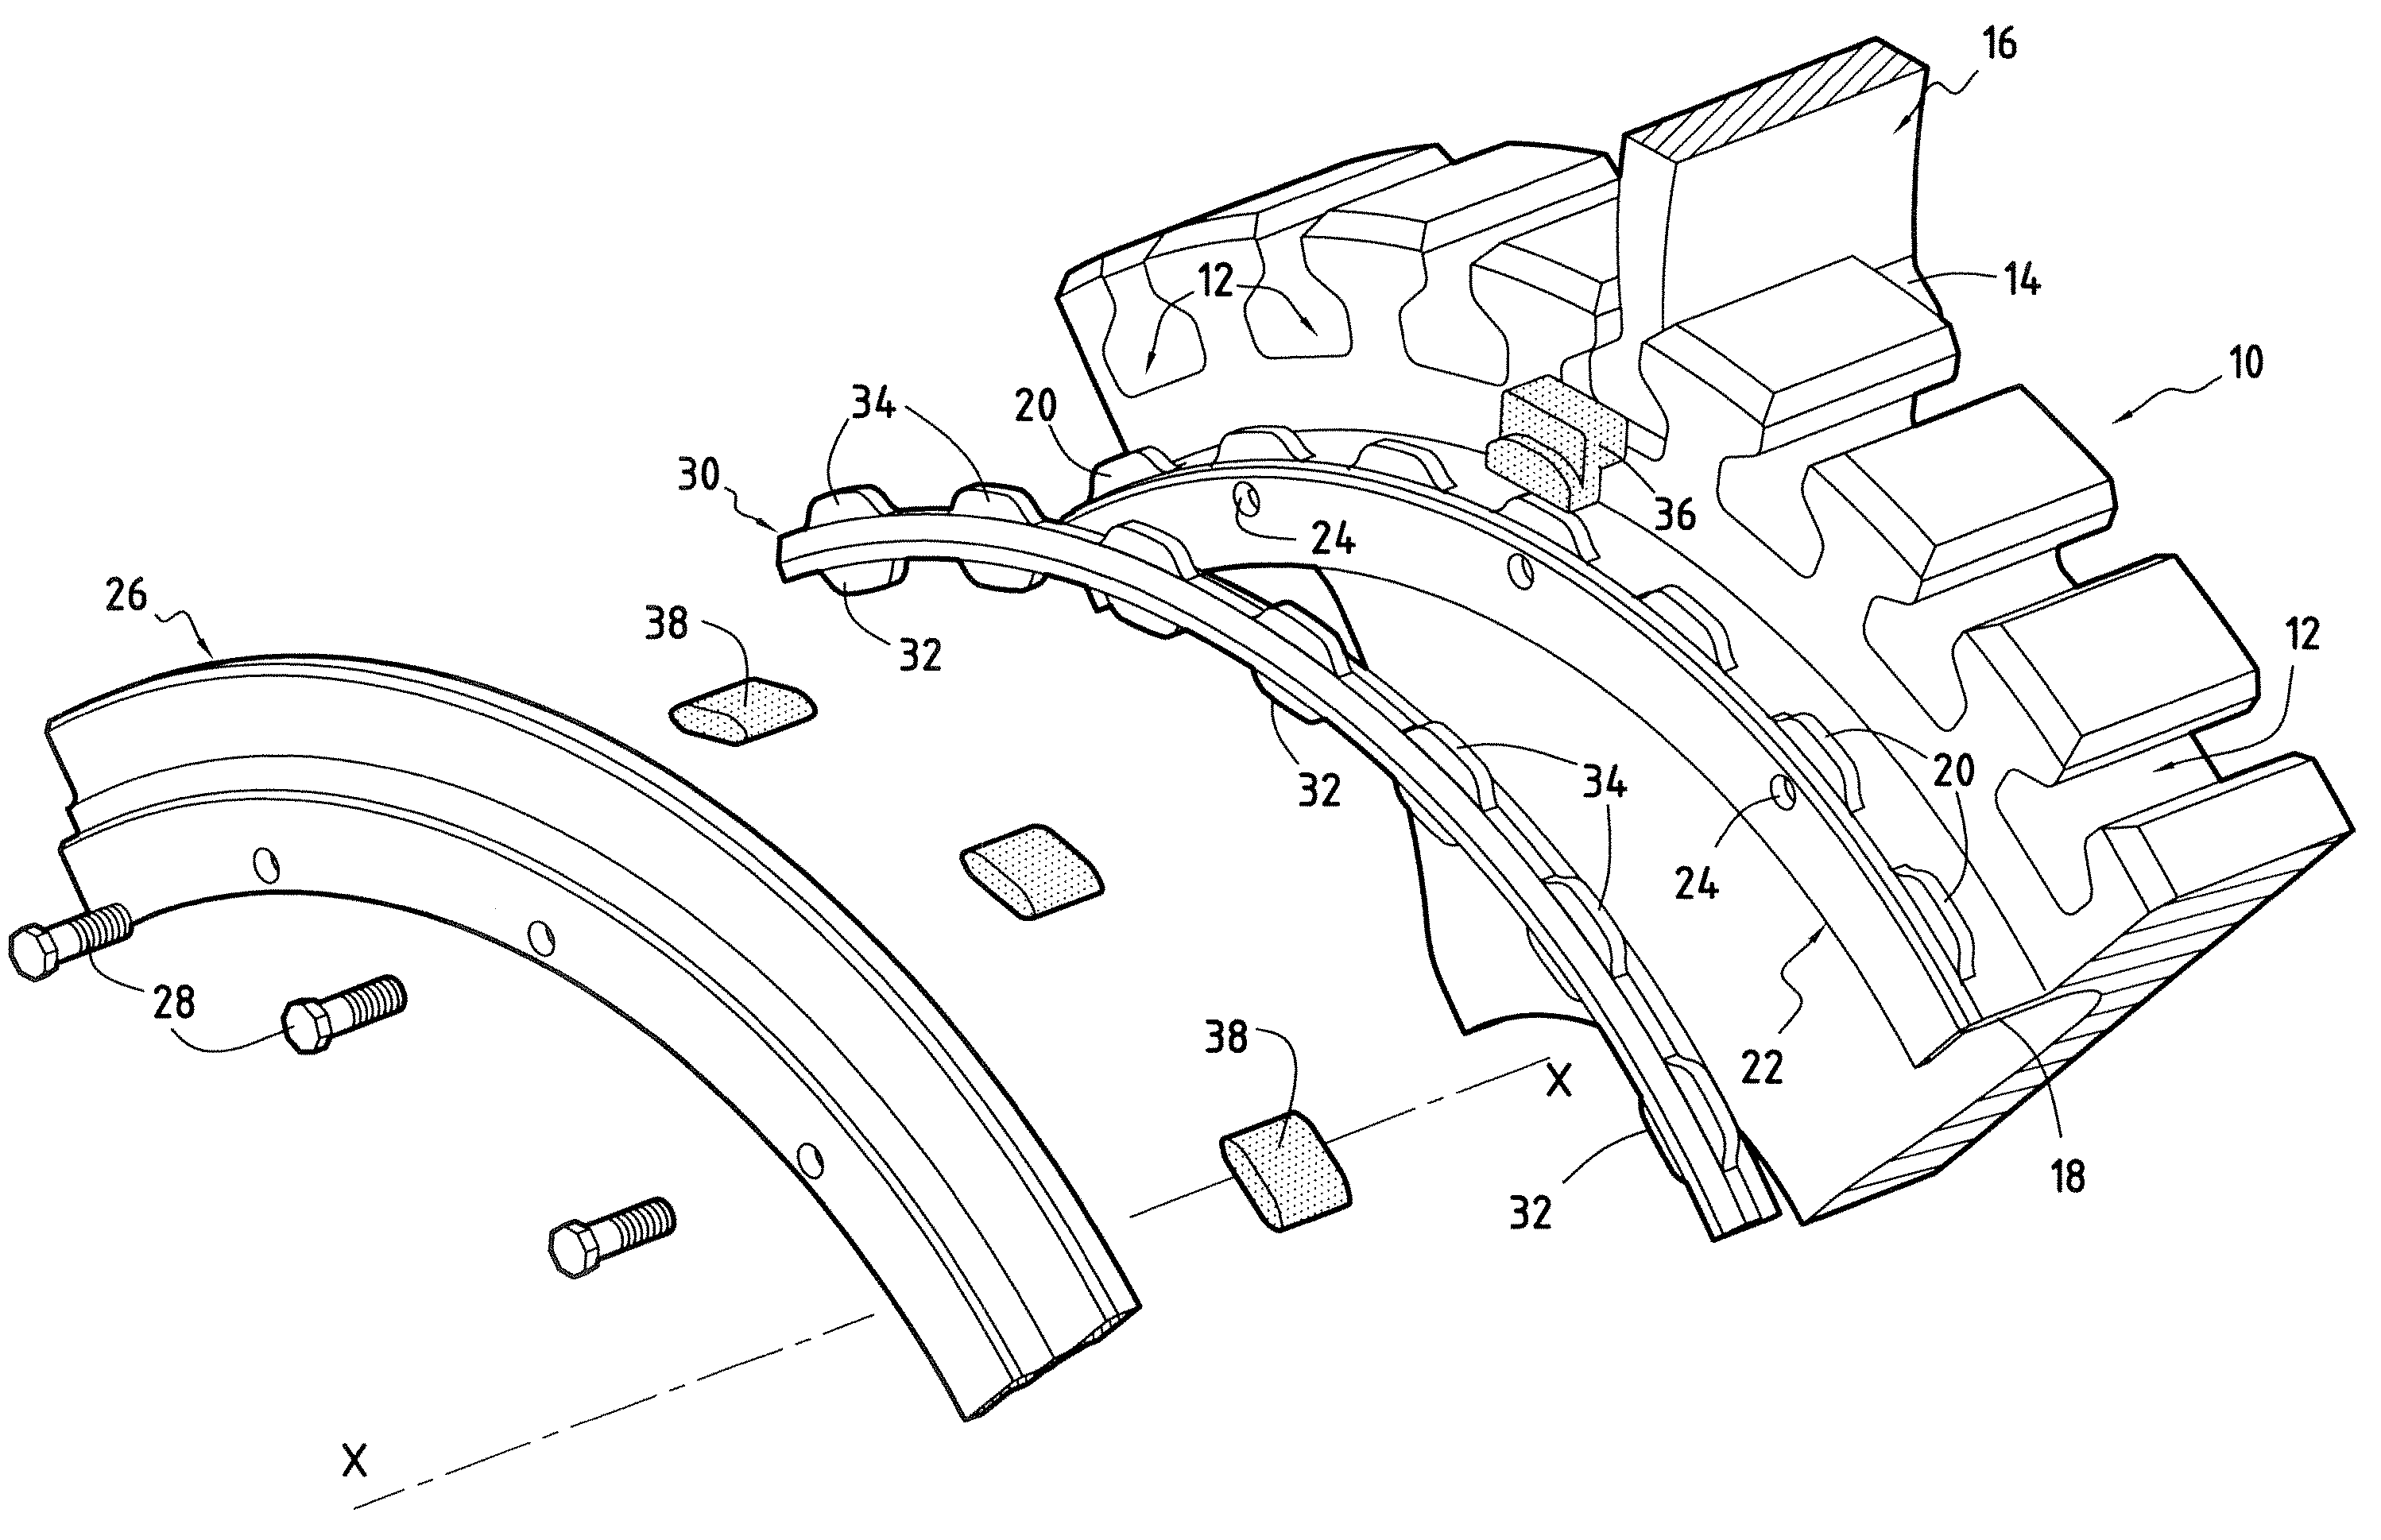 Device for damping vibration of a ring for axially retaining turbomachine fan blades